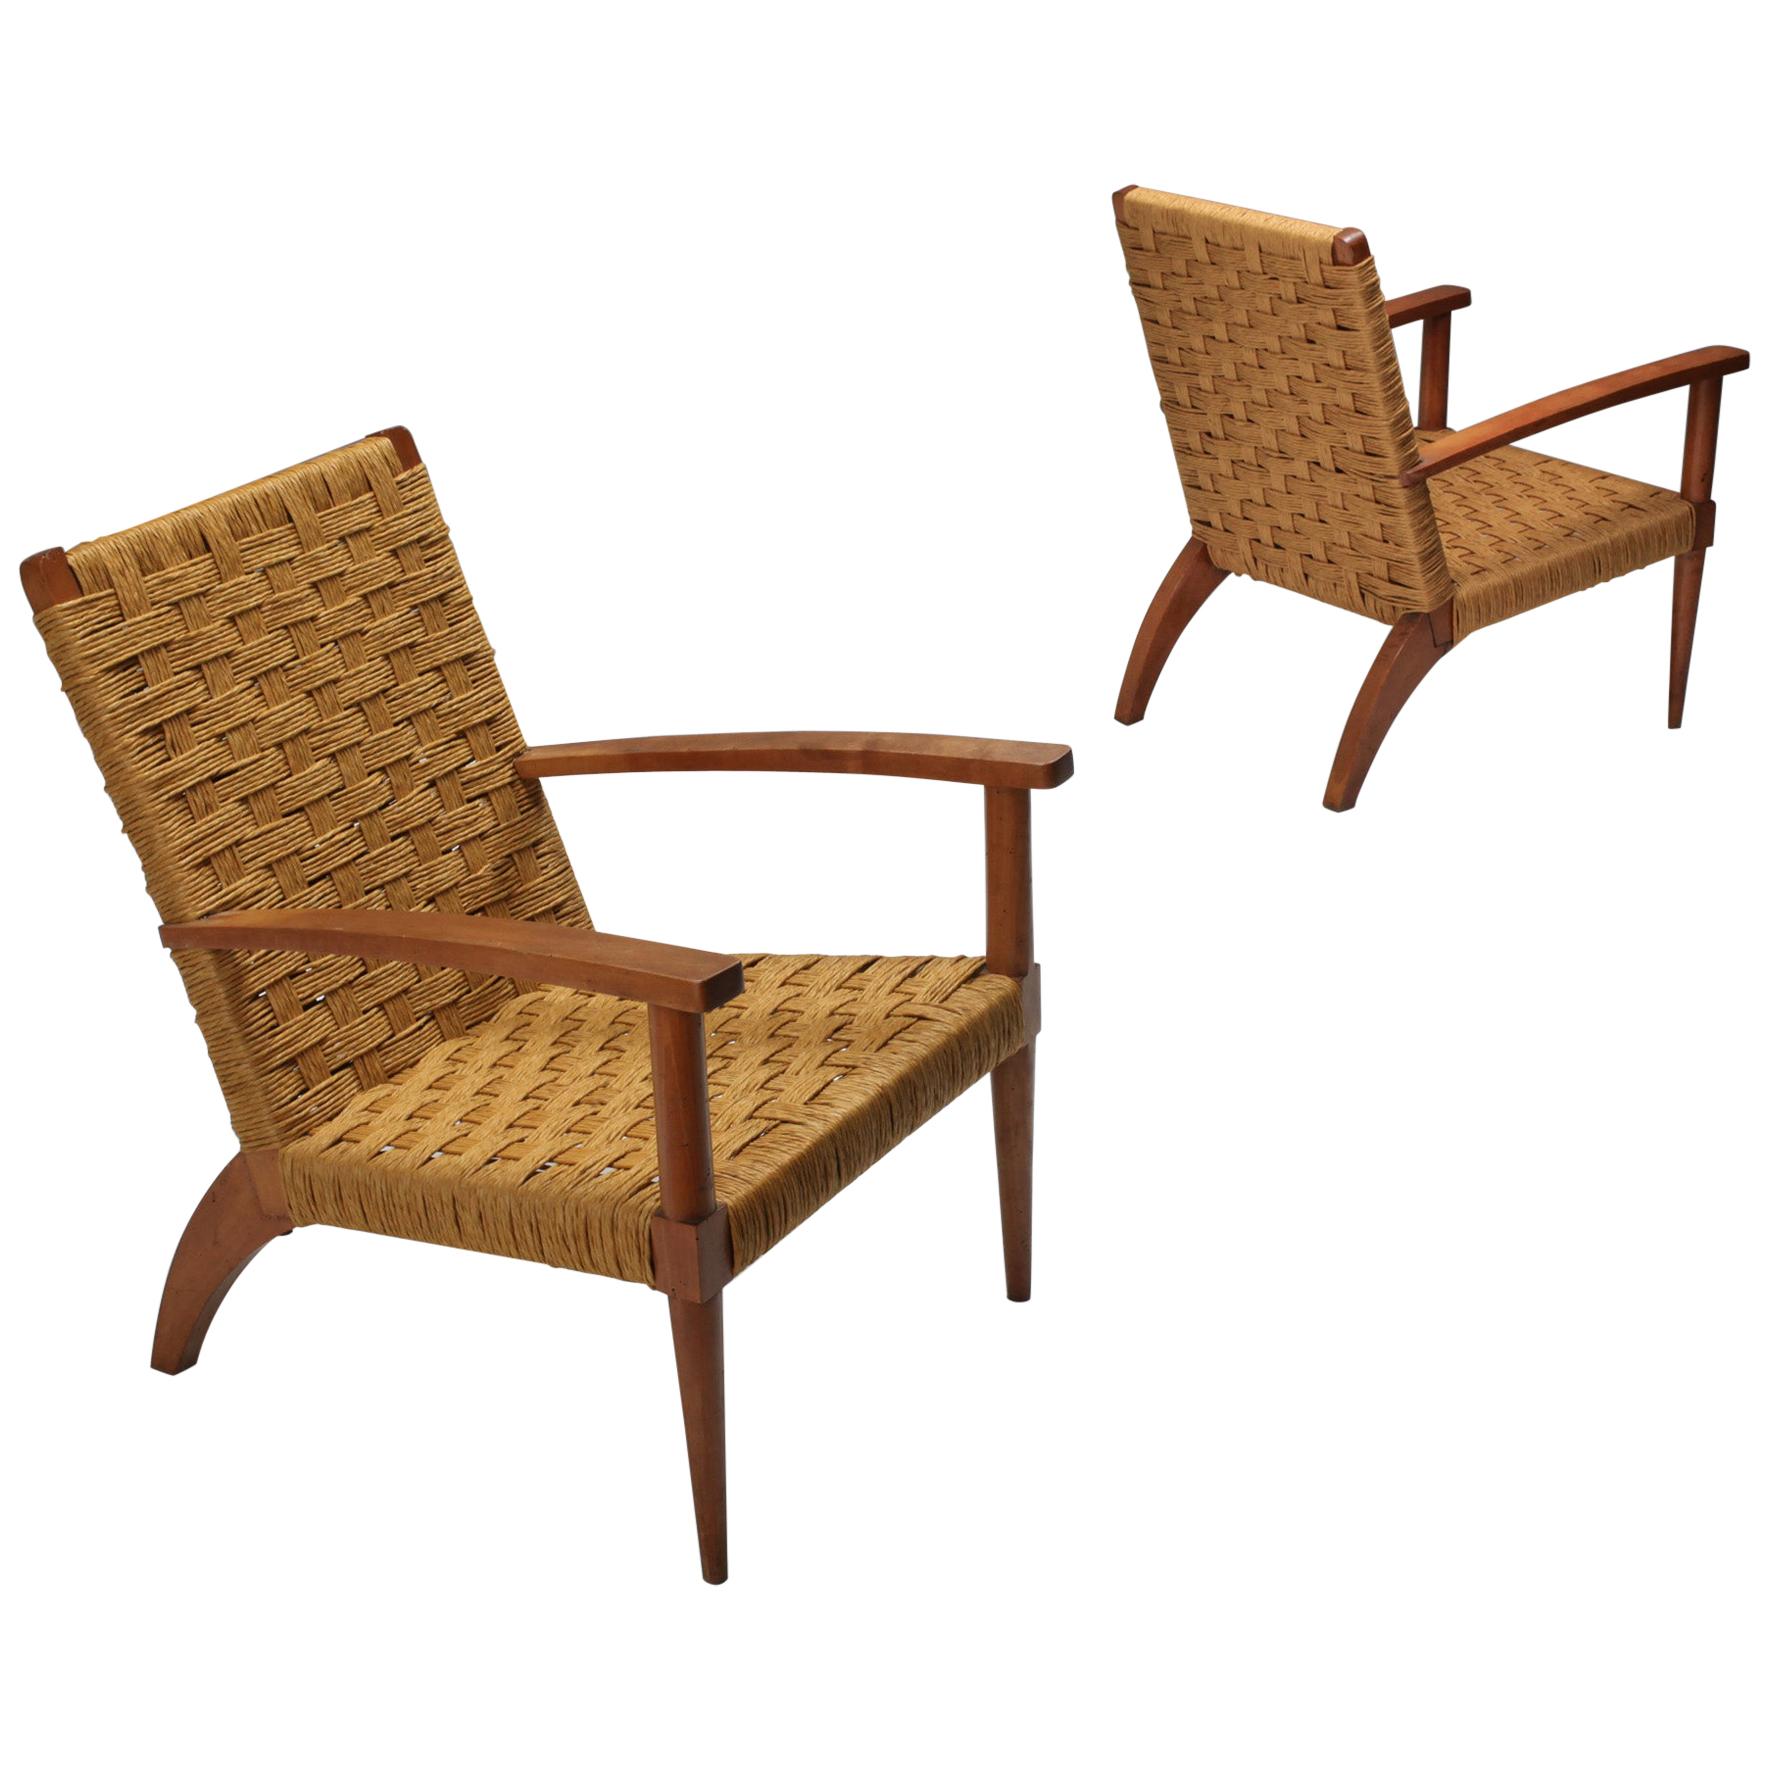 Mid-Century Modern pair of armchairs, Audoux Minet, France, 1960s

Rustic modern pair of French armchairs that would fit well in a naturalist wabi sabi decor.
Beech and cord 
Prijs per piece
two chairs are available.
  